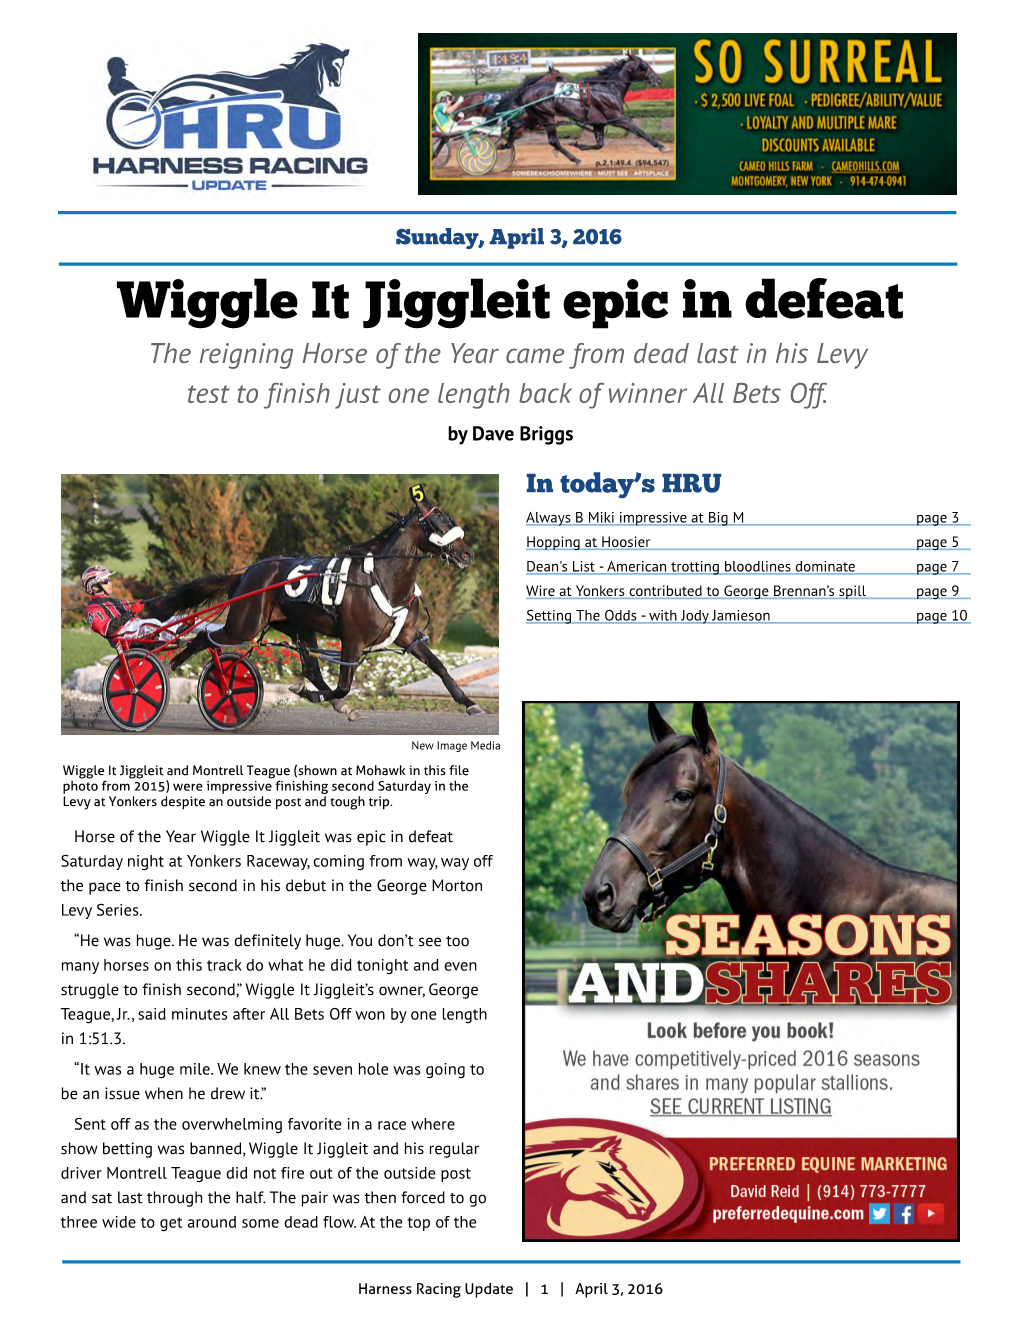 Wiggle It Jiggleit Epic in Defeat the Reigning Horse of the Year Came from Dead Last in His Levy Test to Finish Just One Length Back of Winner All Bets Off